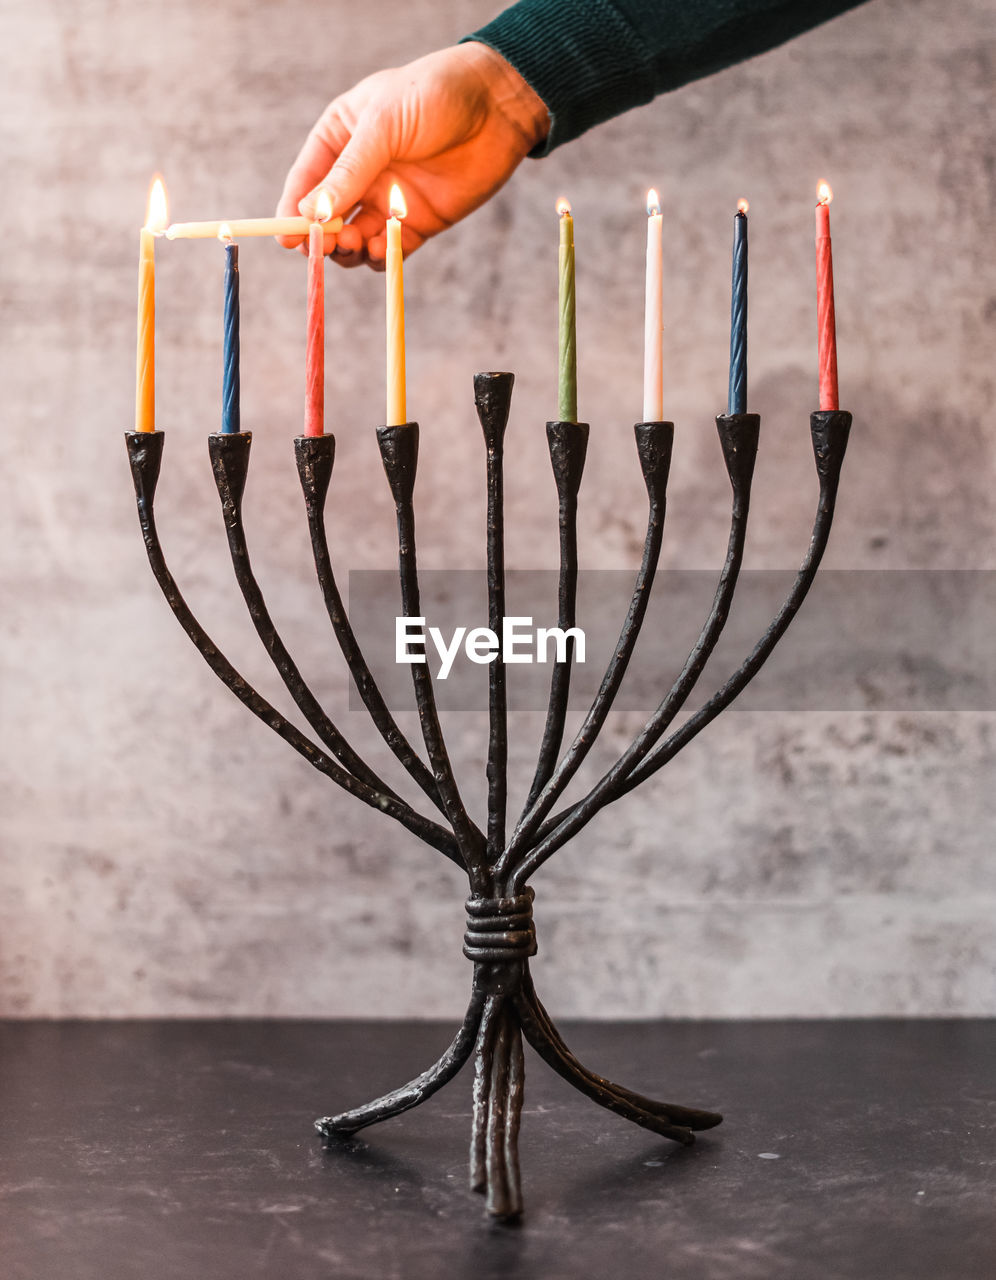 Cropped image of a hand lighting candles on menorah for hanukkah.